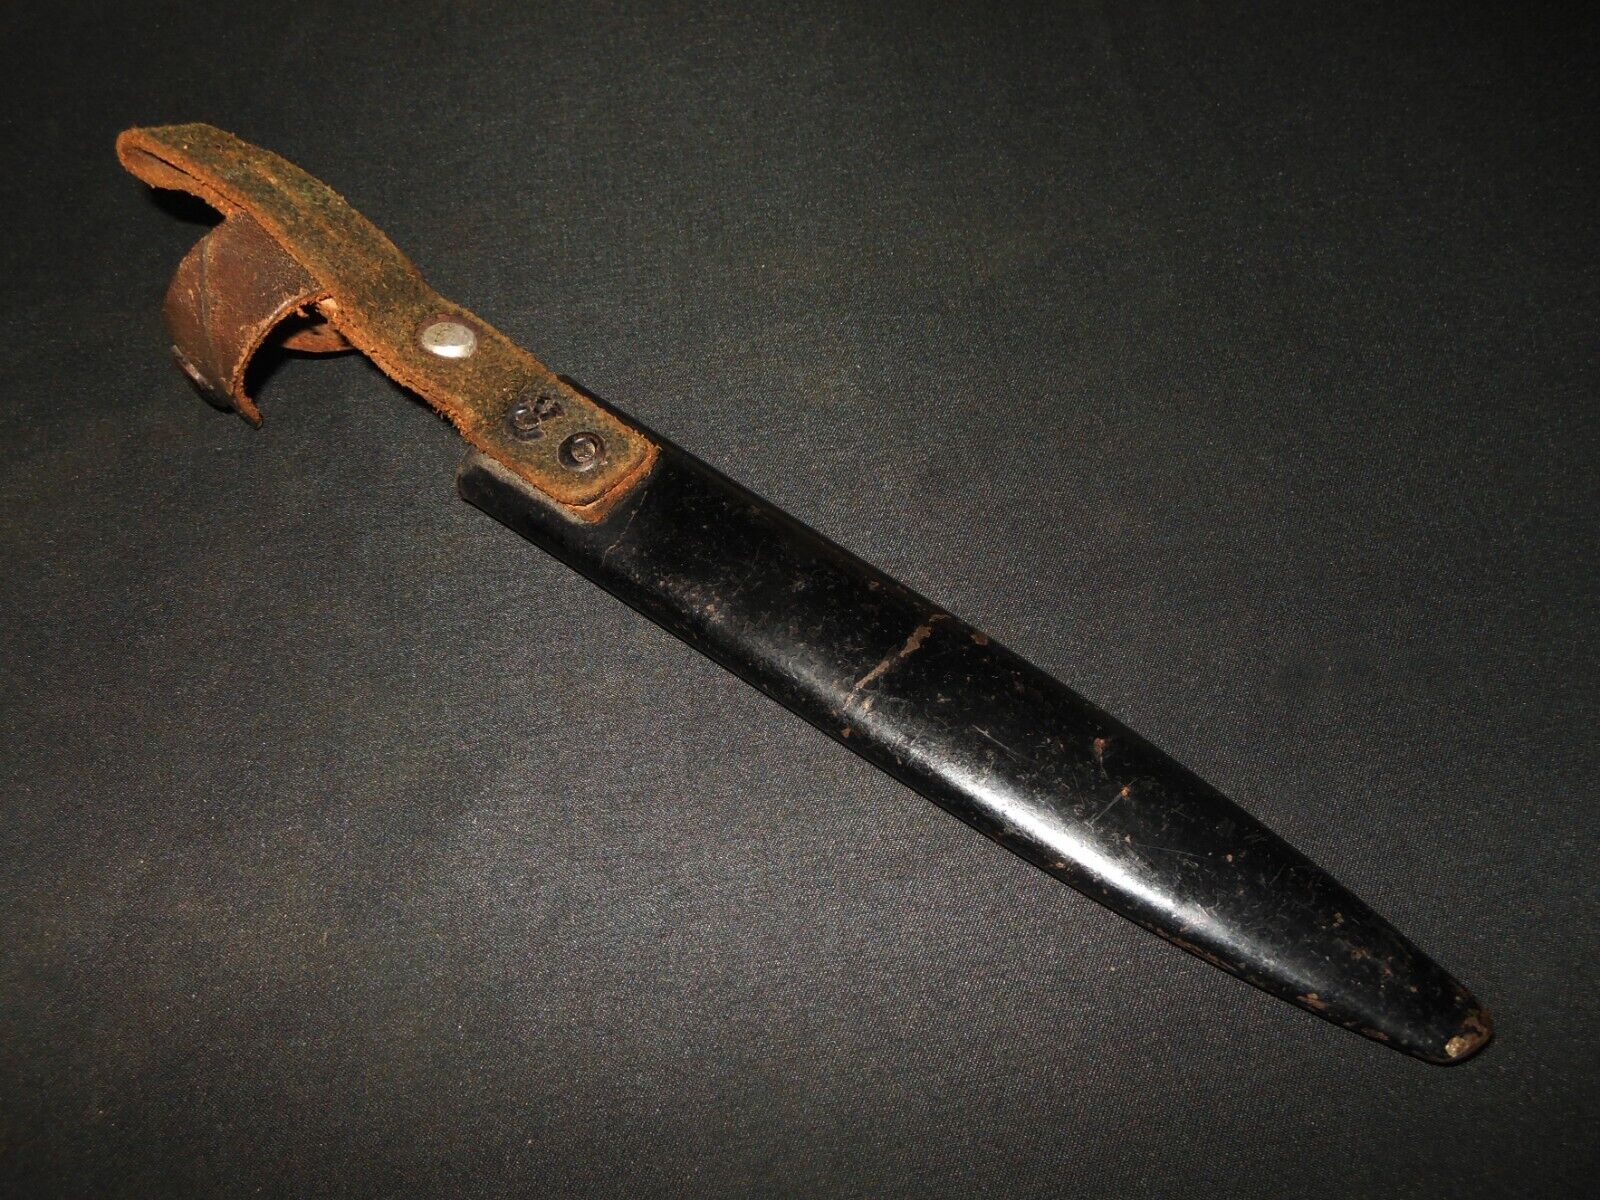 https://axis-militaria.com/wp-content/uploads/imported/2/WW1-Imperial-German-Army-Nahkampfmesser-COMBAT-TRENCH-KNIFE-NICE-235280896902-11.jpg